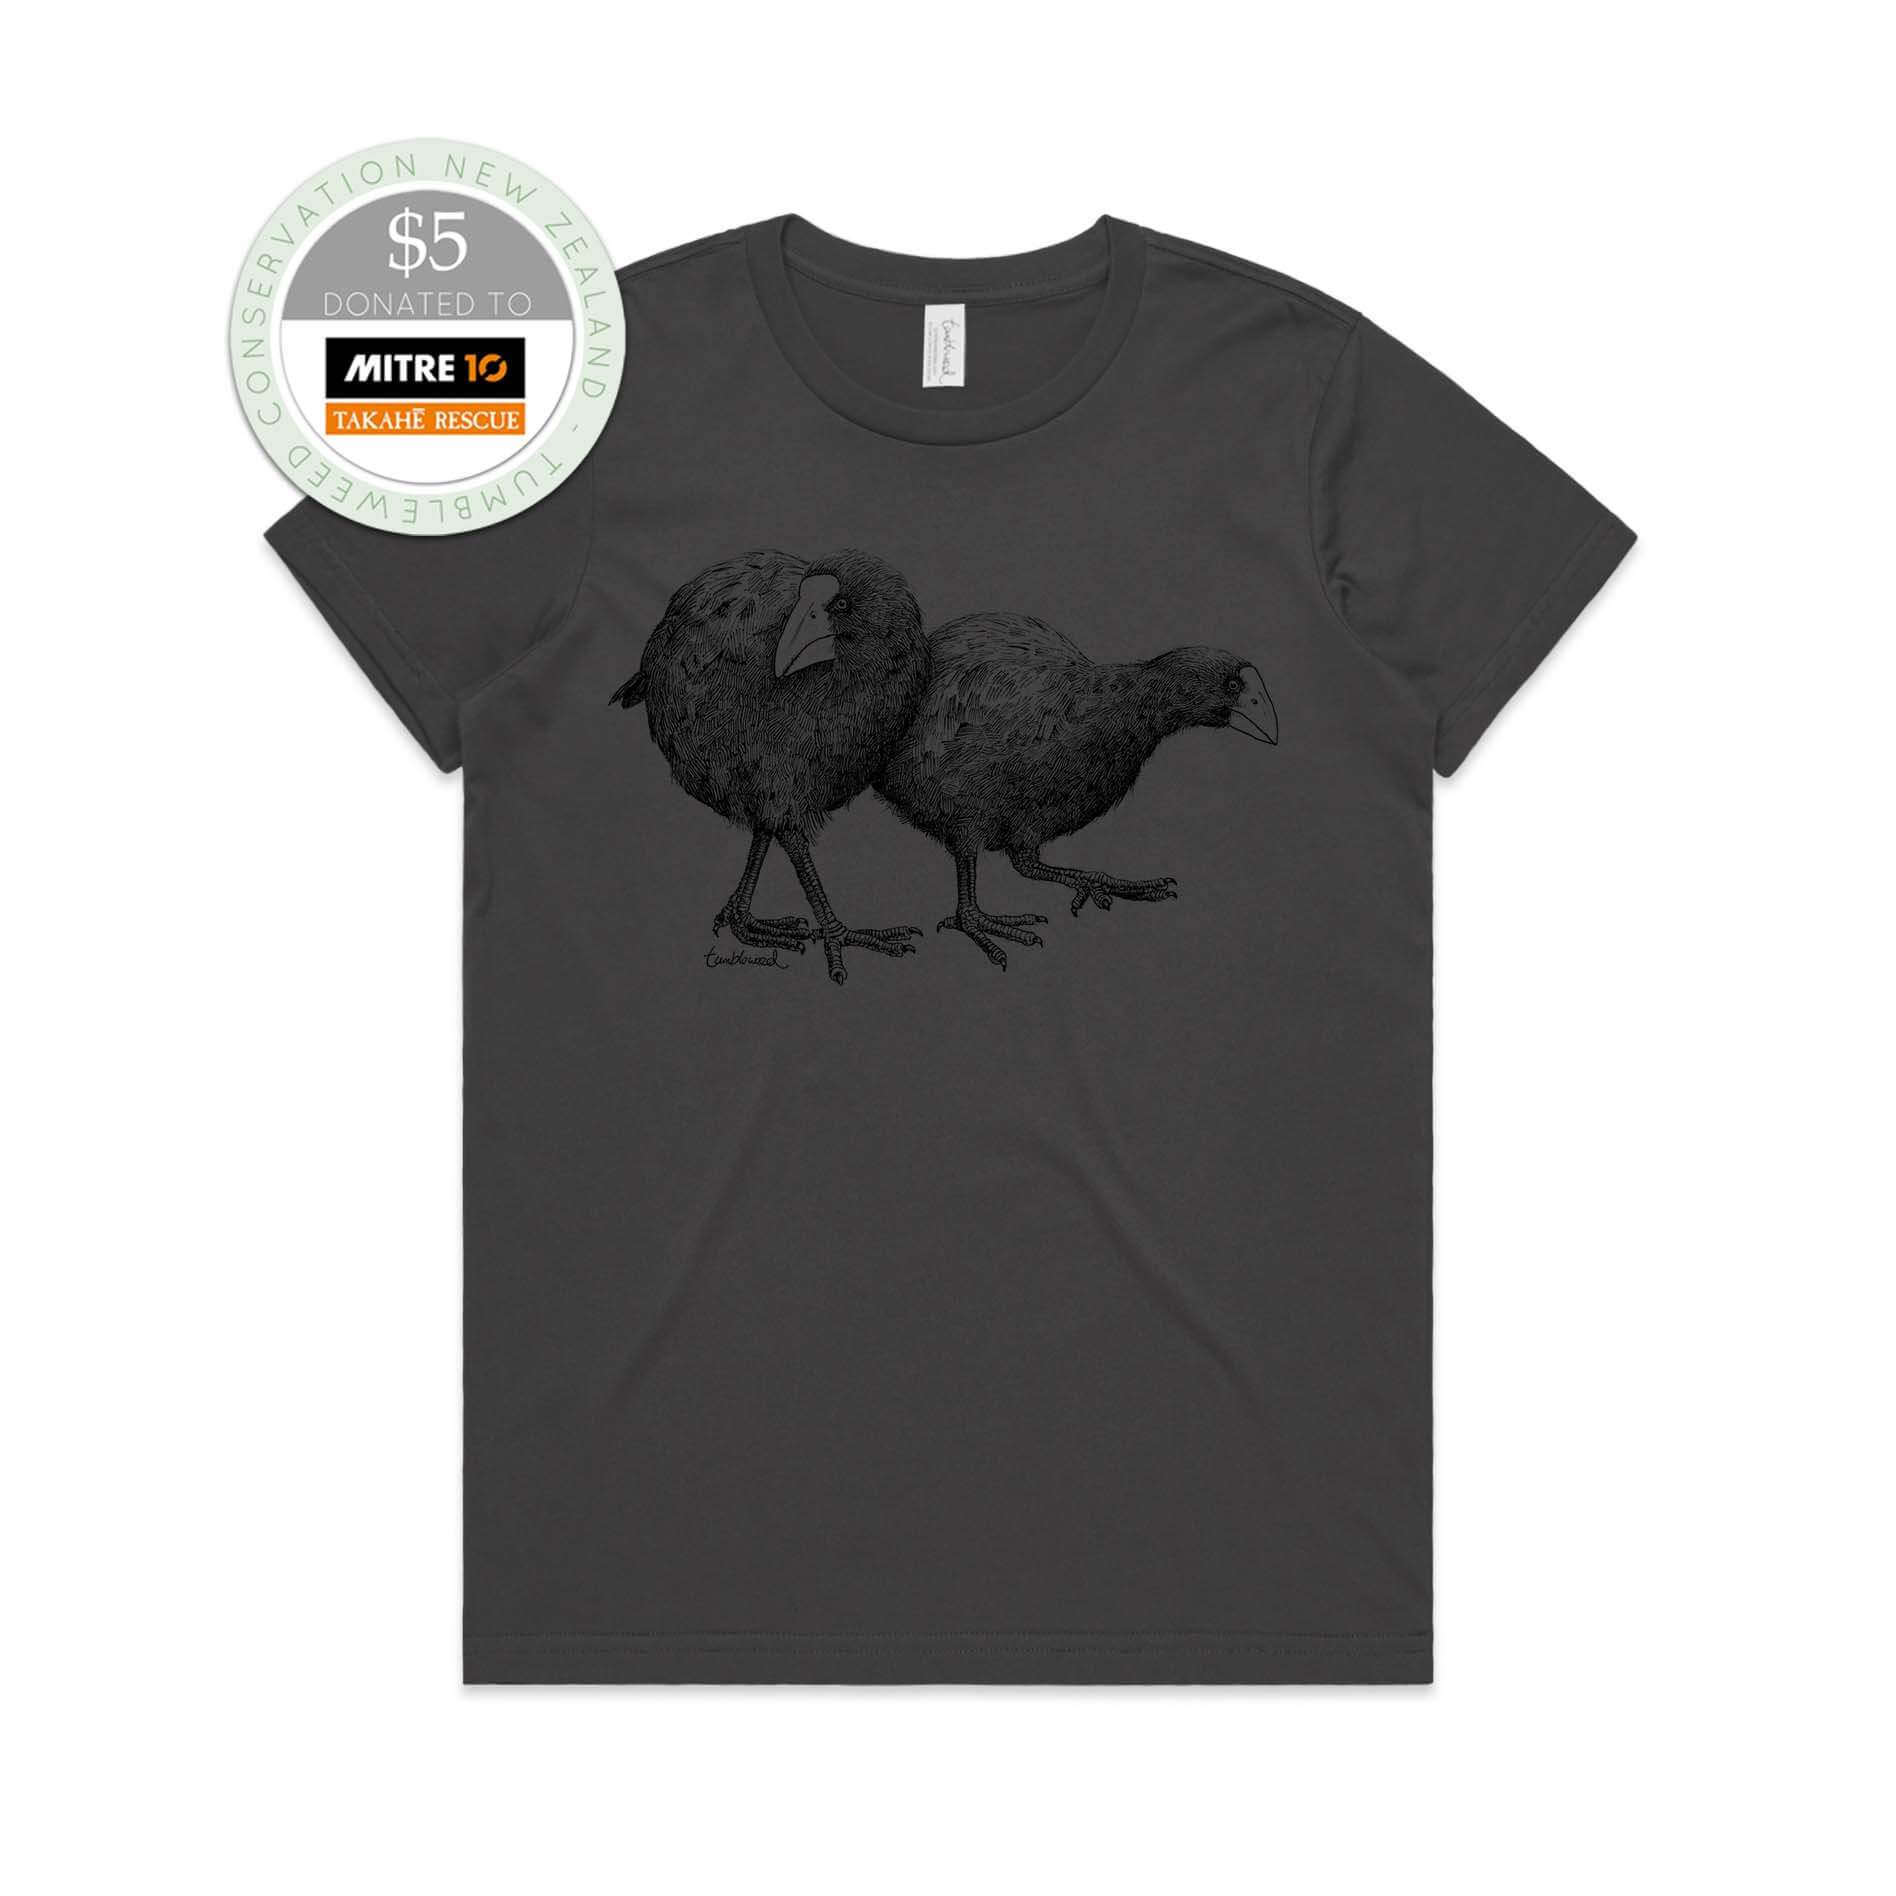 Charcoal, female t-shirt featuring a screen printed Takahē design.